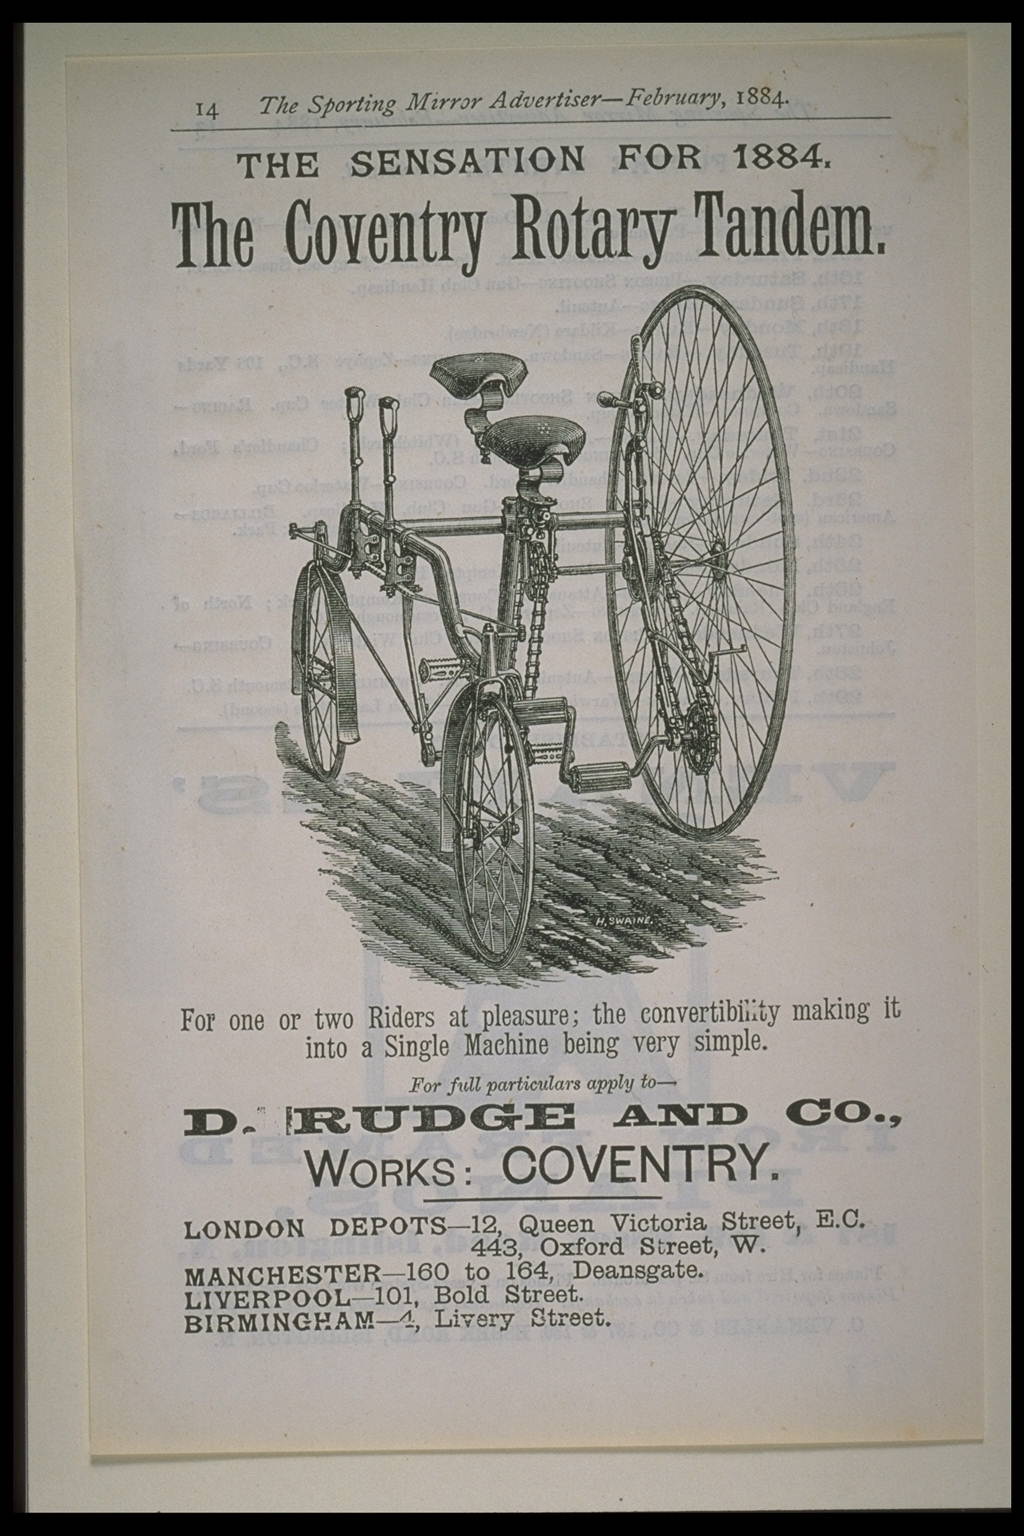 The Coventry Rotary Tandem bicycle